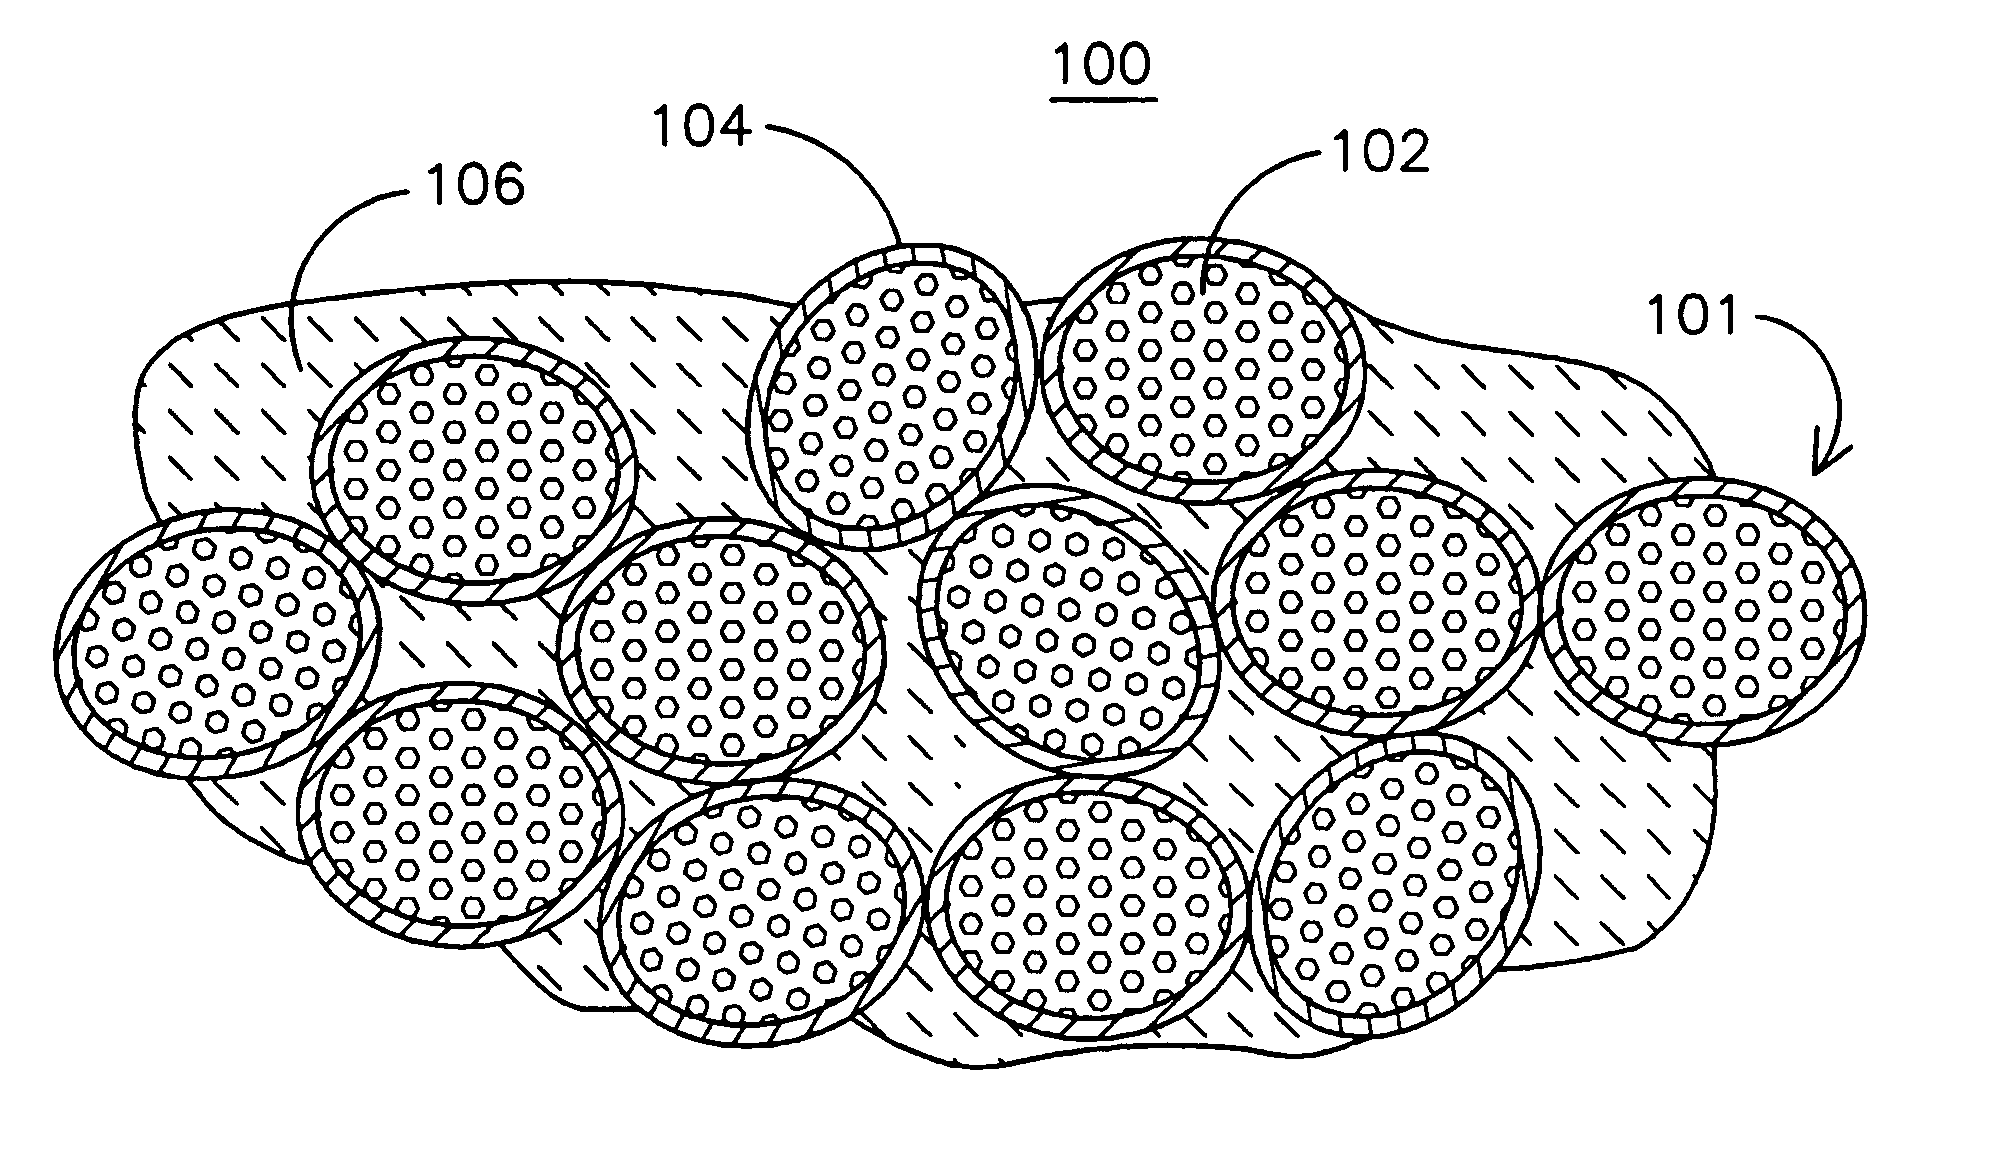 Insulating ceramic based on partially filled shapes